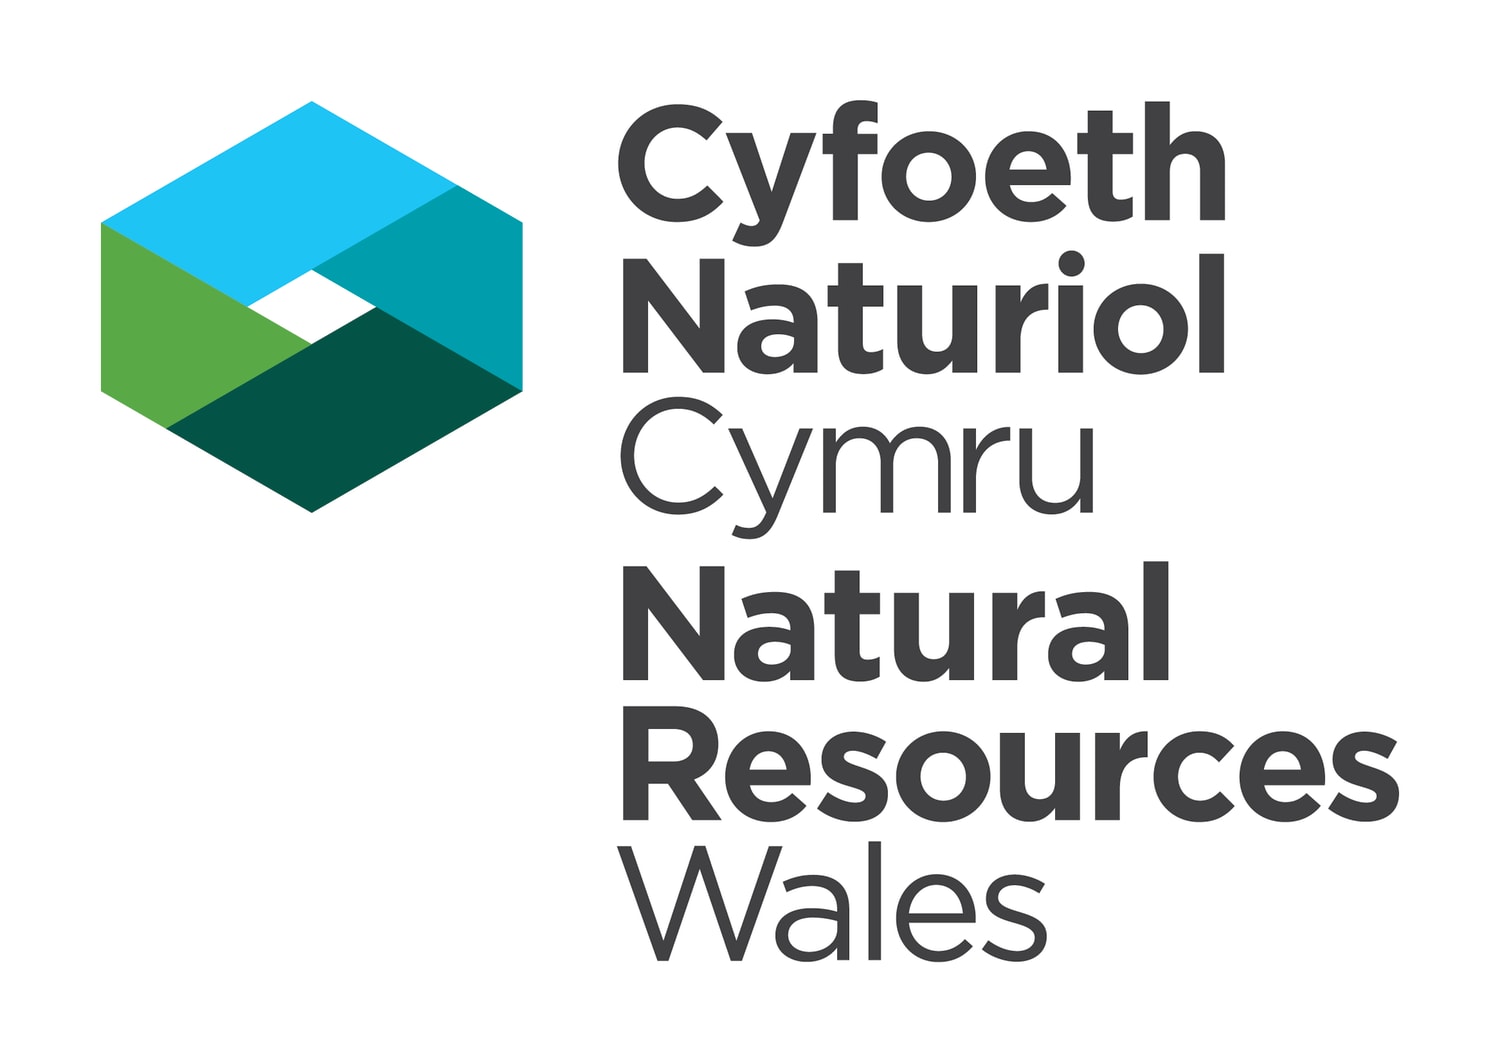 Natural Resources Wales / Dyfi National Nature Reserve and Ynyslas Visitor Centre, near Aberystwyth